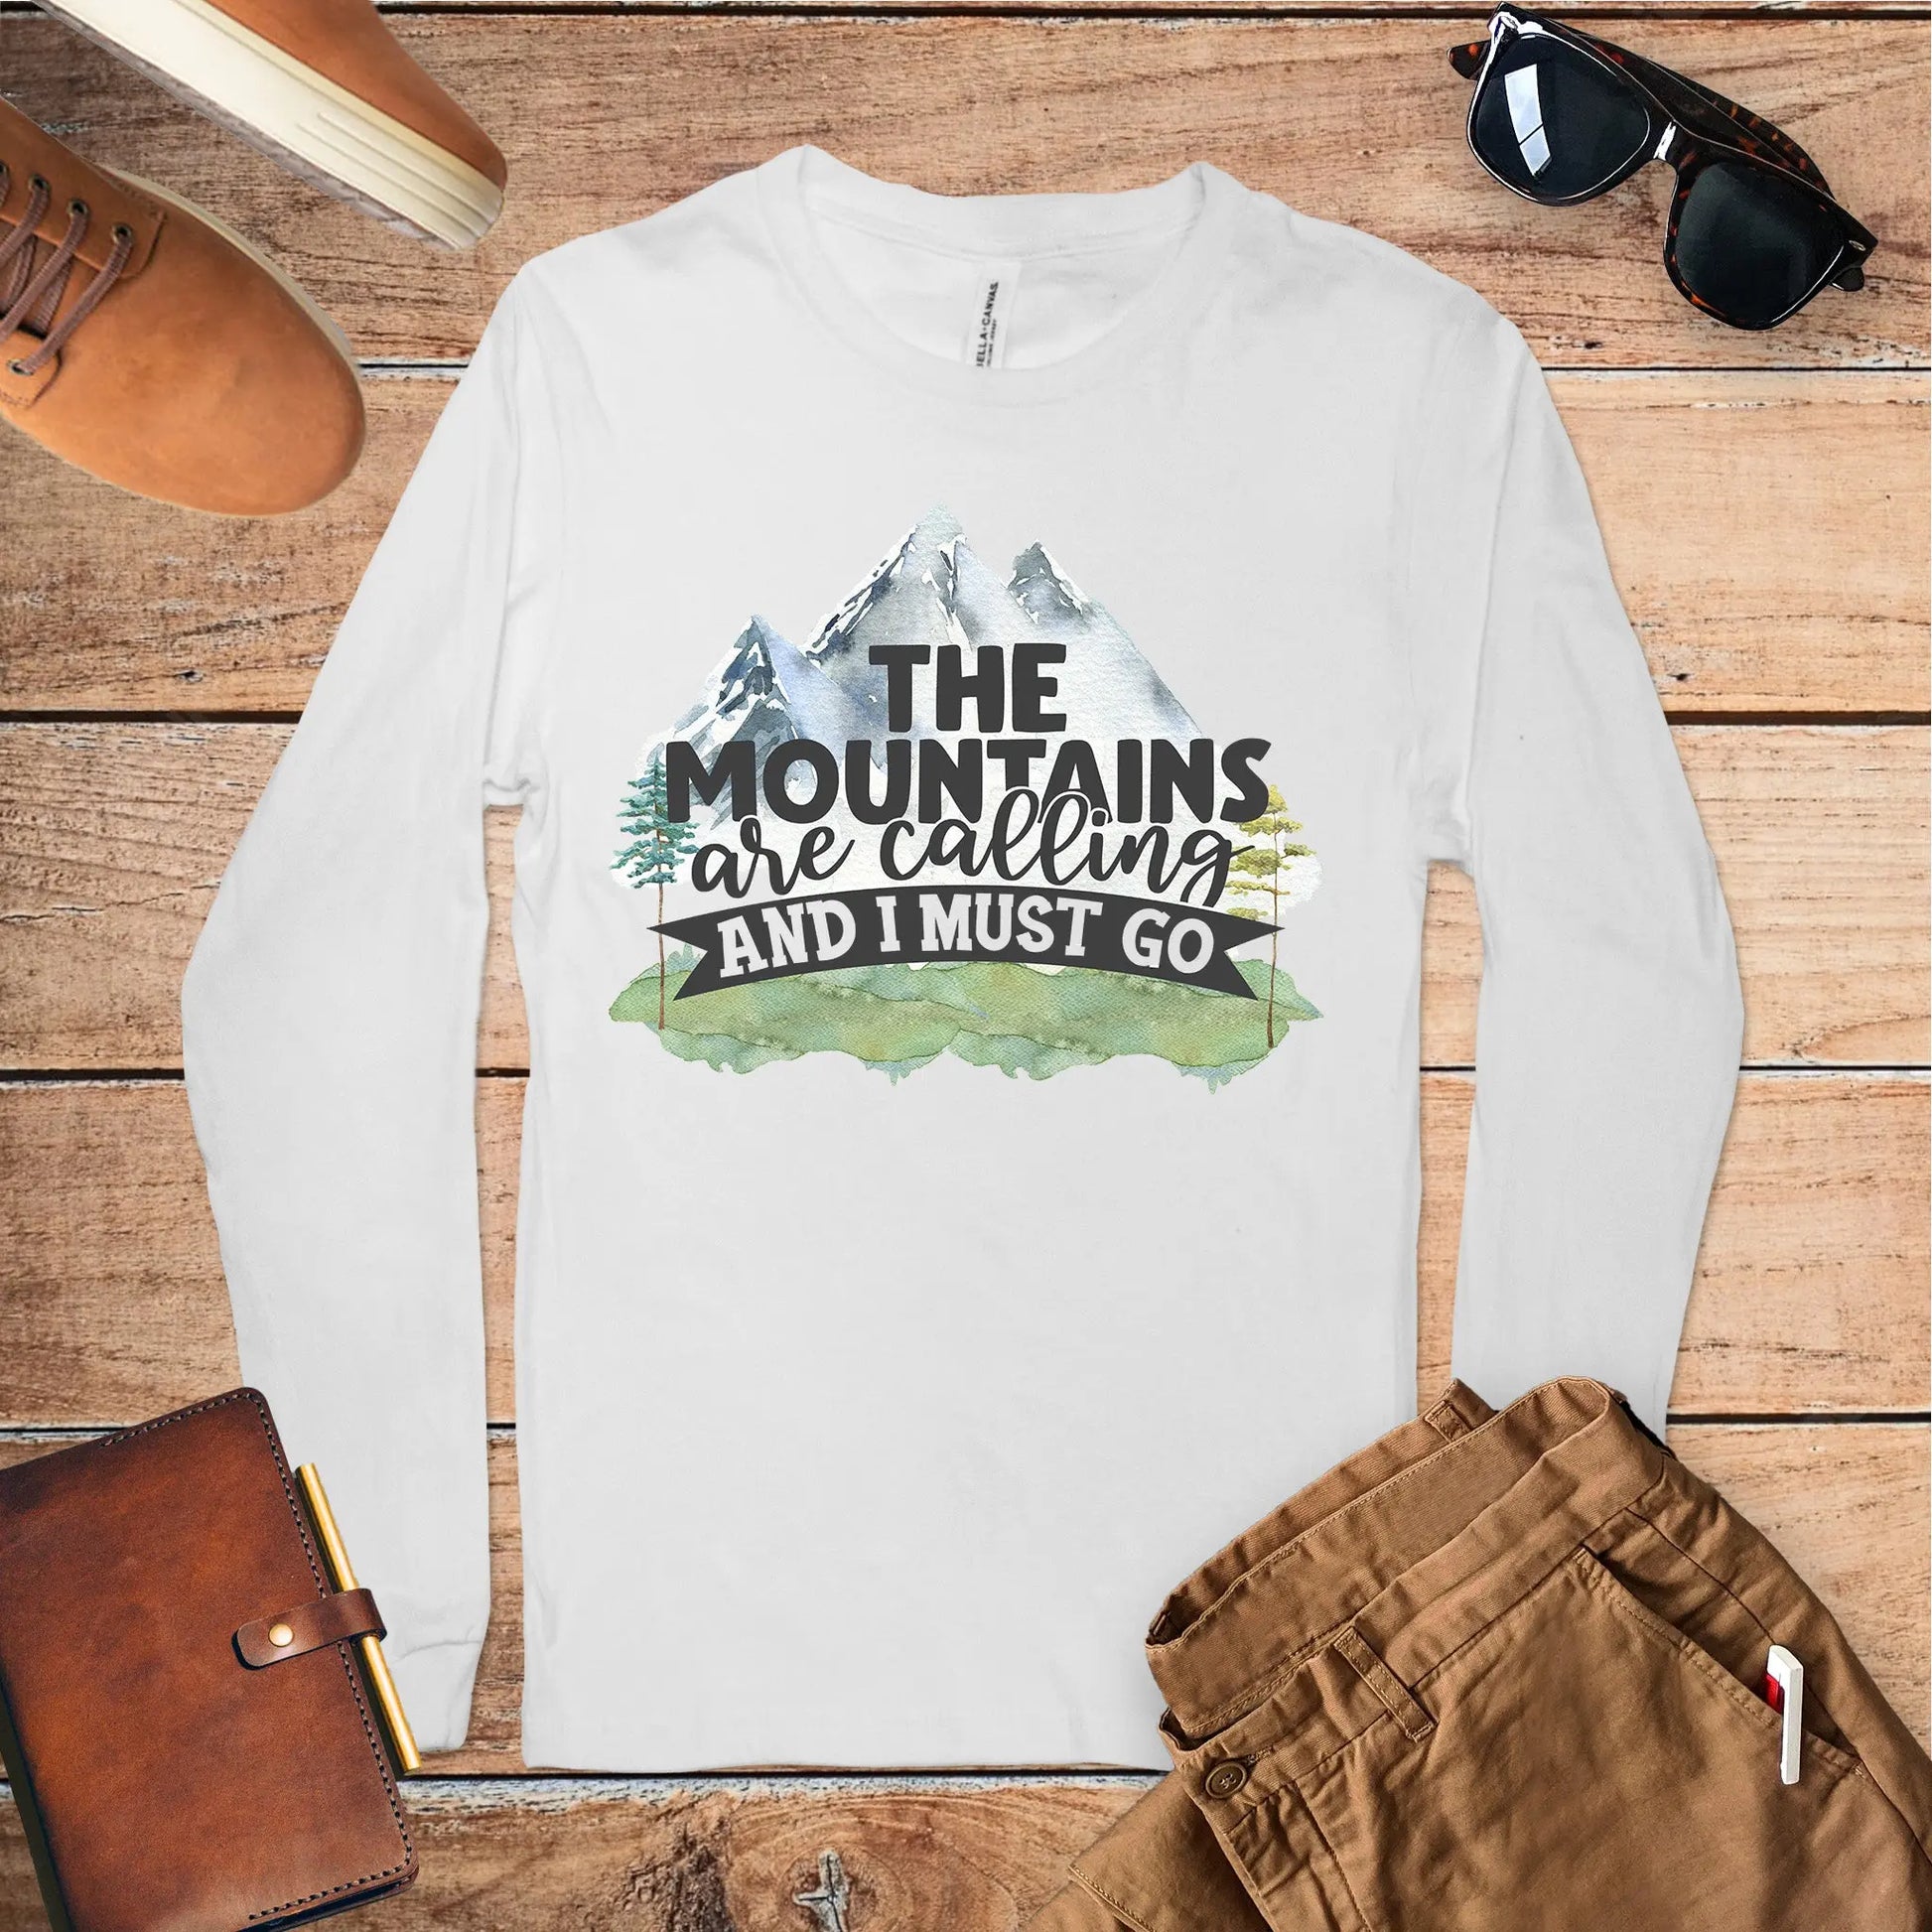 Mountains Are Calling Unisex Jersey Long Sleeve Tee, Hiker Tshirt, Adventurer, Nature Lover Gift, Camper Tee Printify